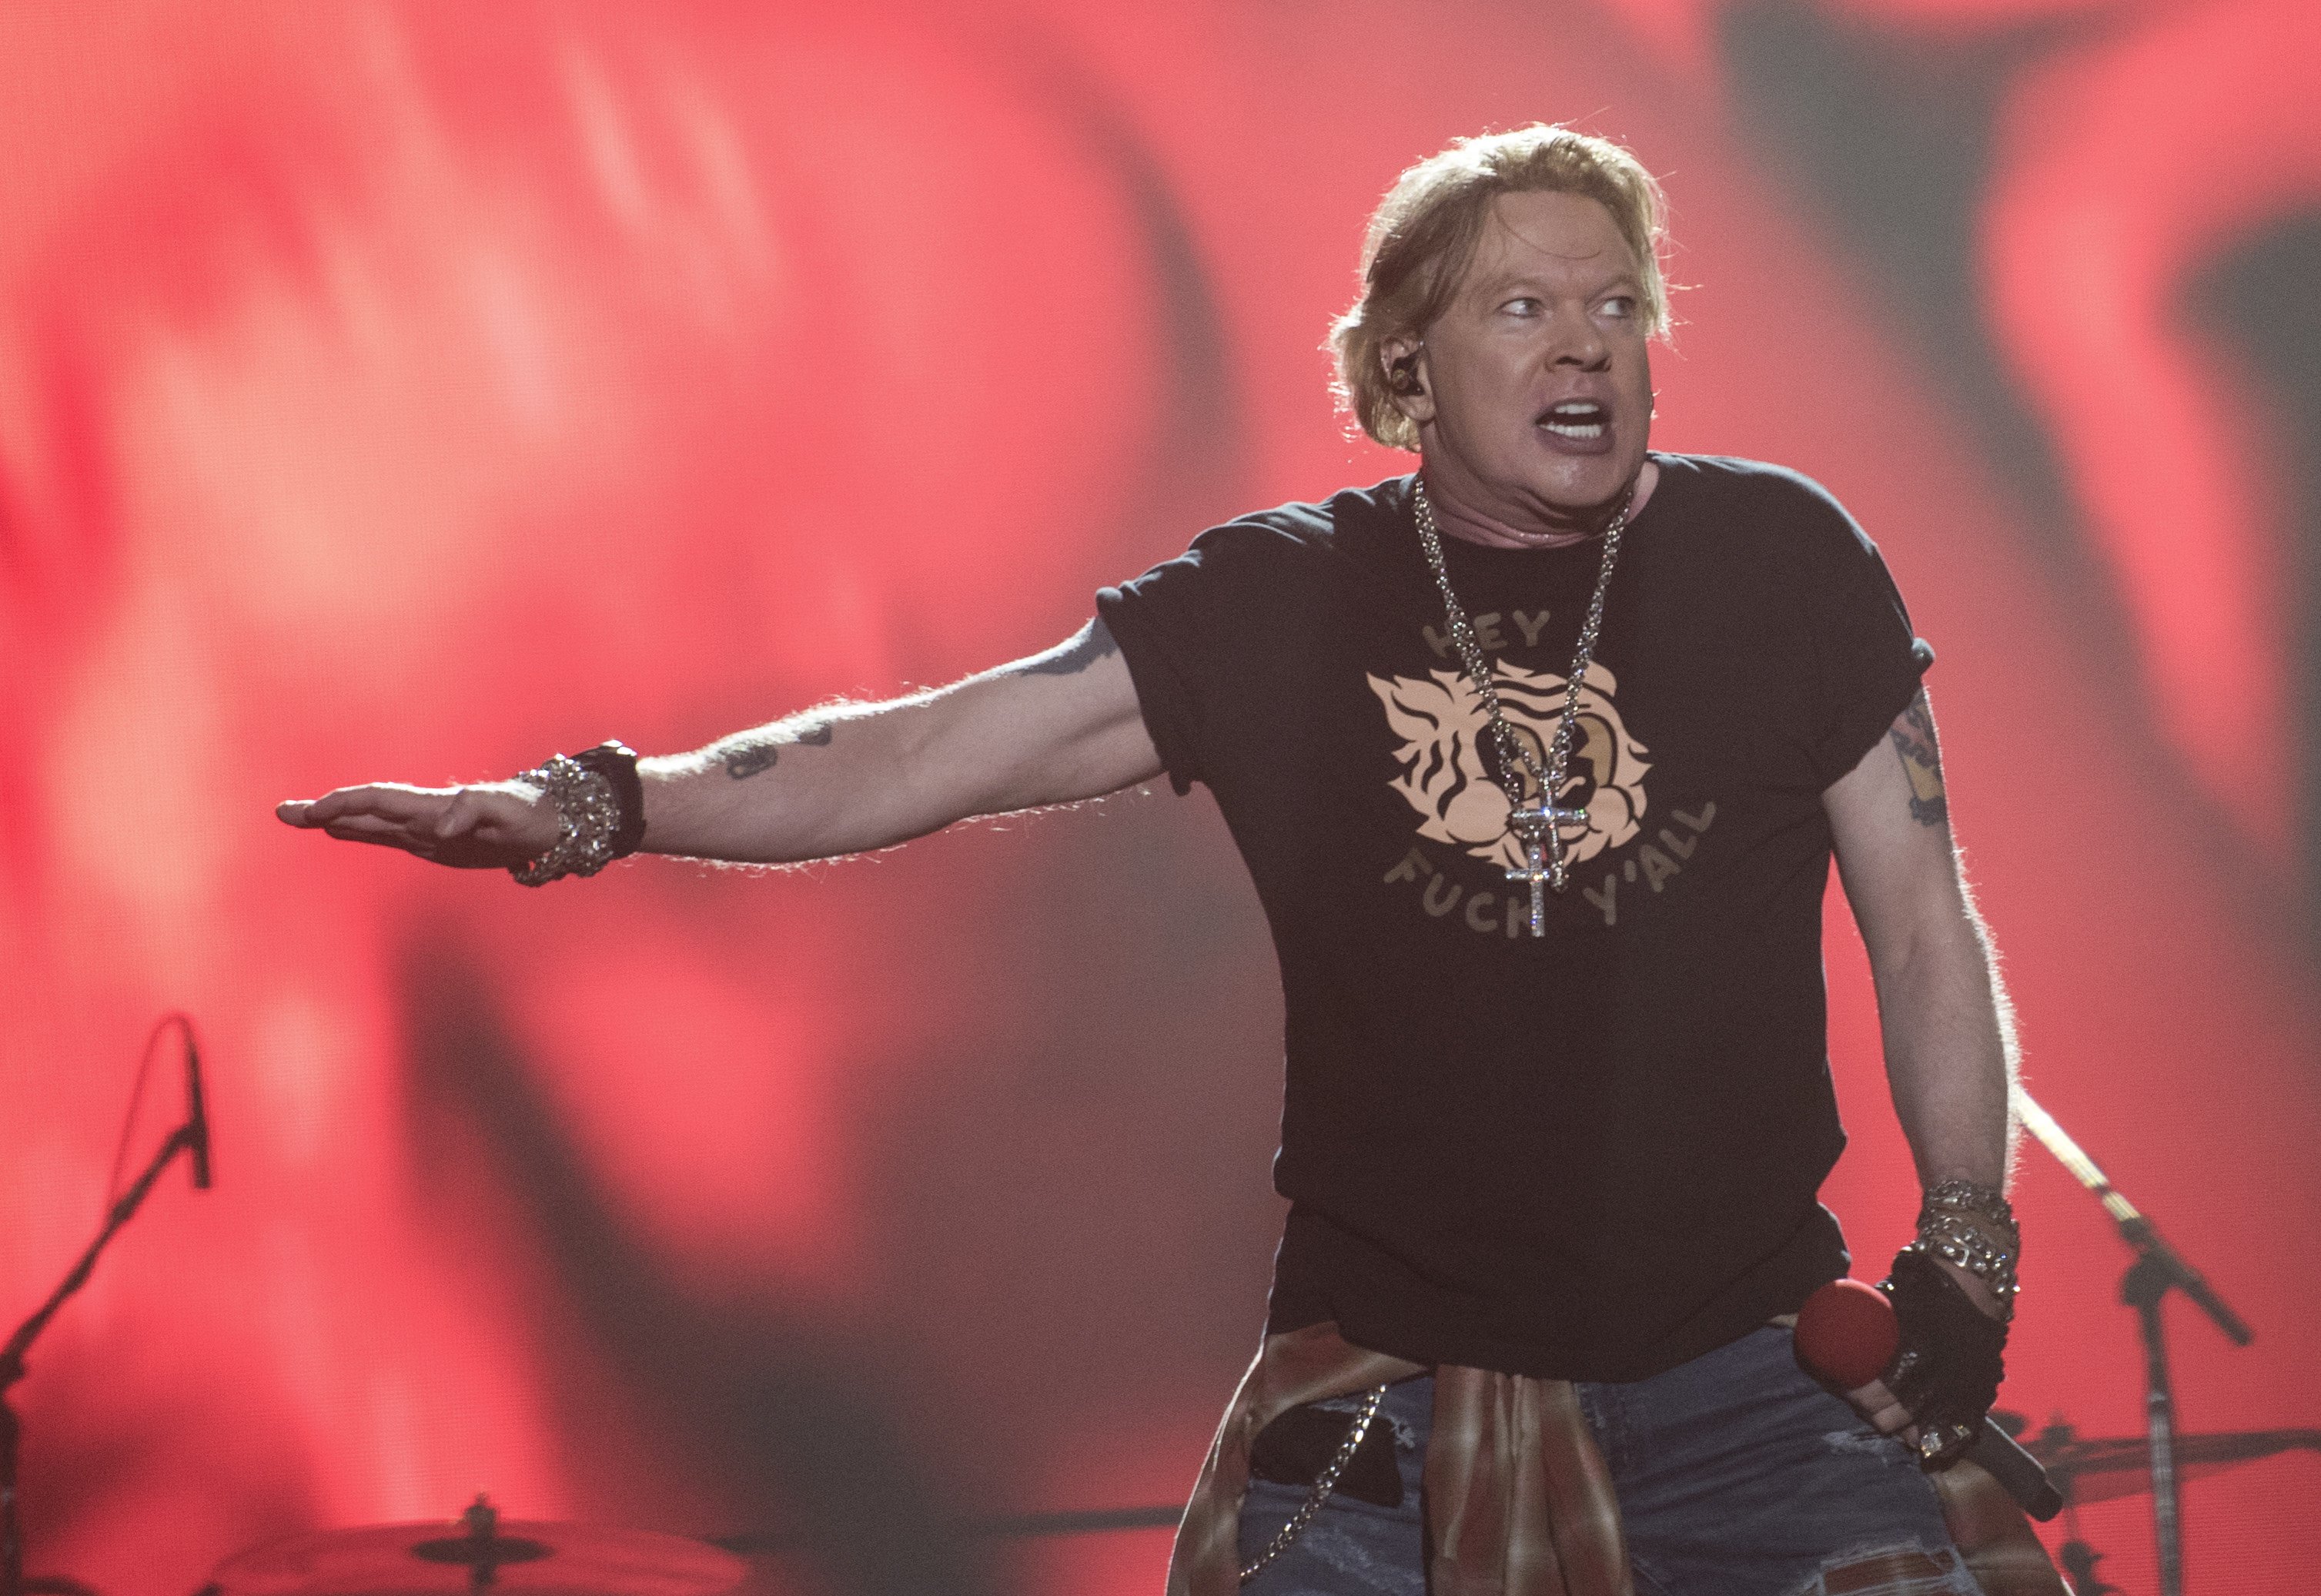 Axl Rose lead singer of band "Guns N´ Roses" performs during the Vive Latino 2020 festival at the Foro Sol in Mexico City, on March 14, 2020. | Source: Getty Images